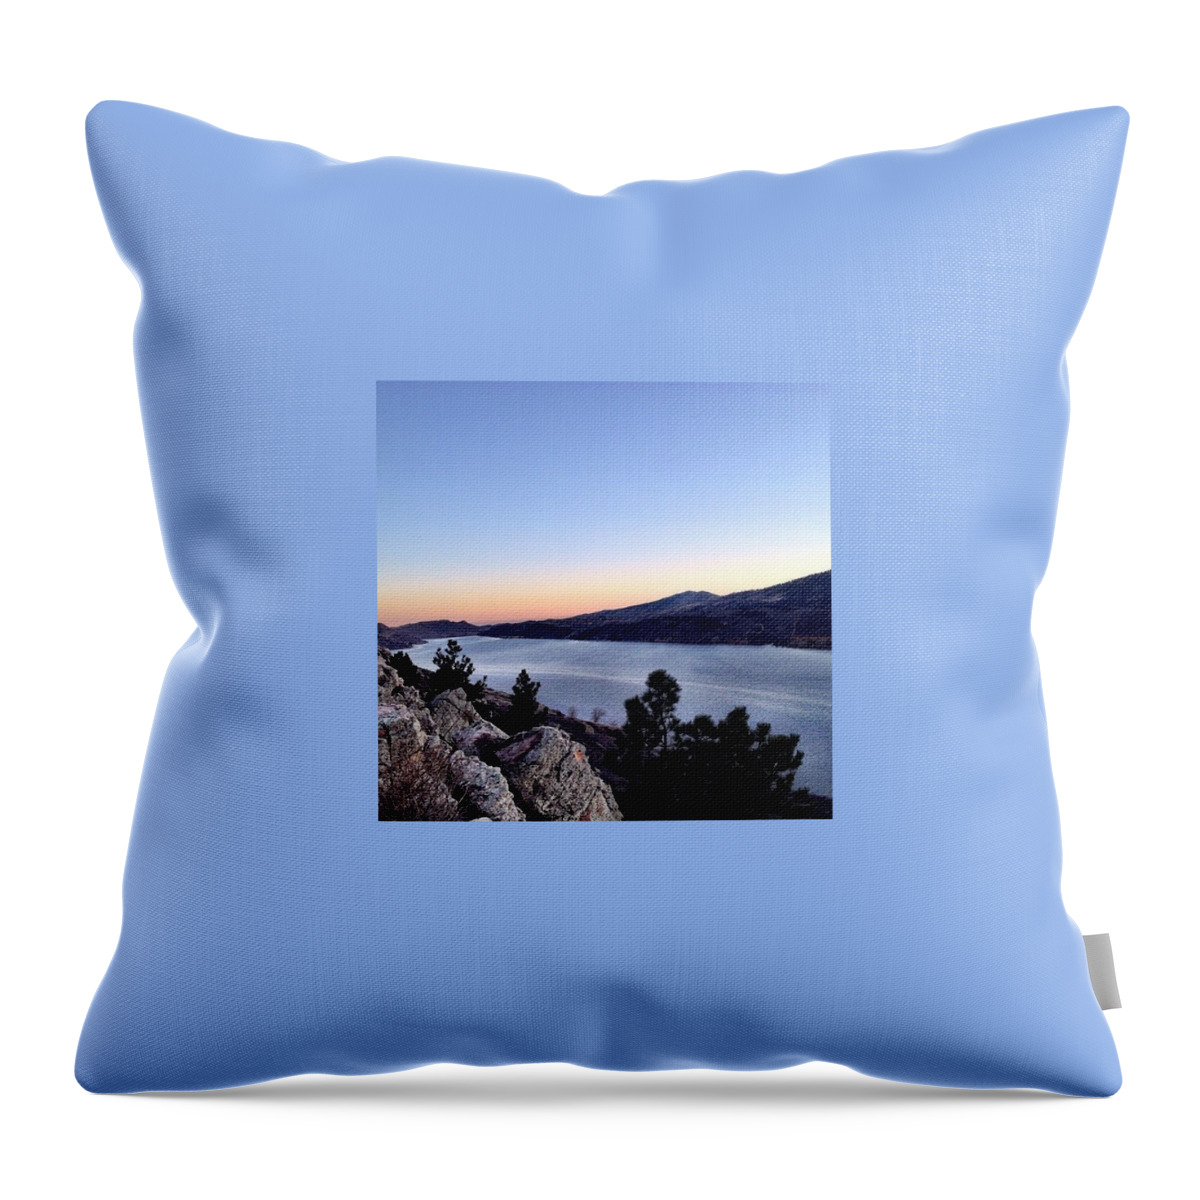 Fortcollins Throw Pillow featuring the photograph Fort Collins At Sunset Is Such A by Madison Dragna